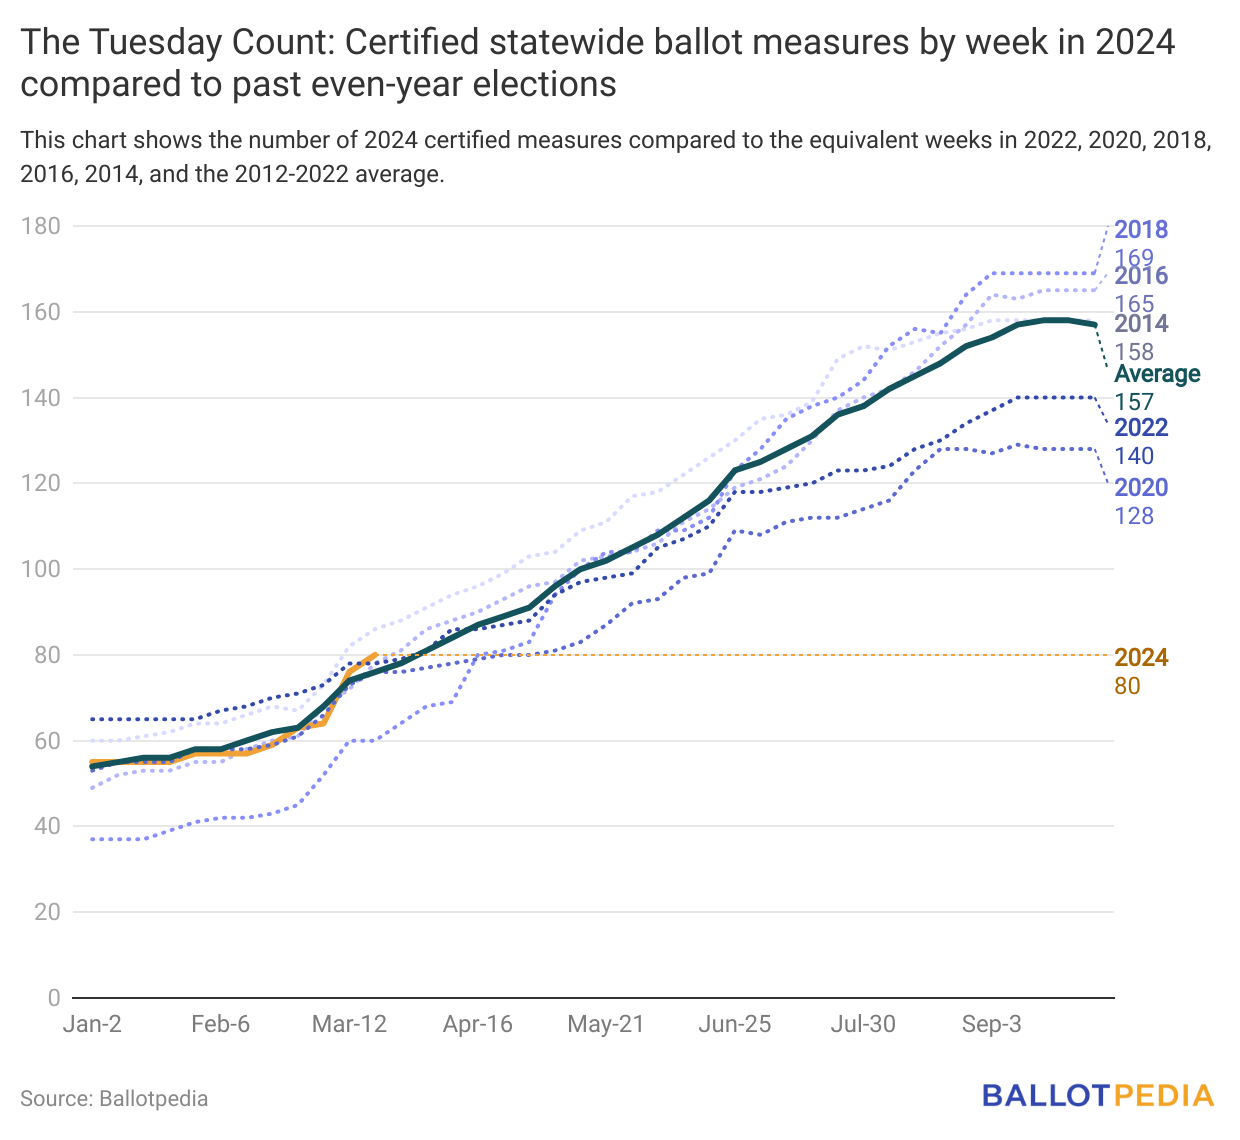 chart: “The Tuesday Count: Certified statewide ballot measures by week in 2024 compared to past even-year elections”